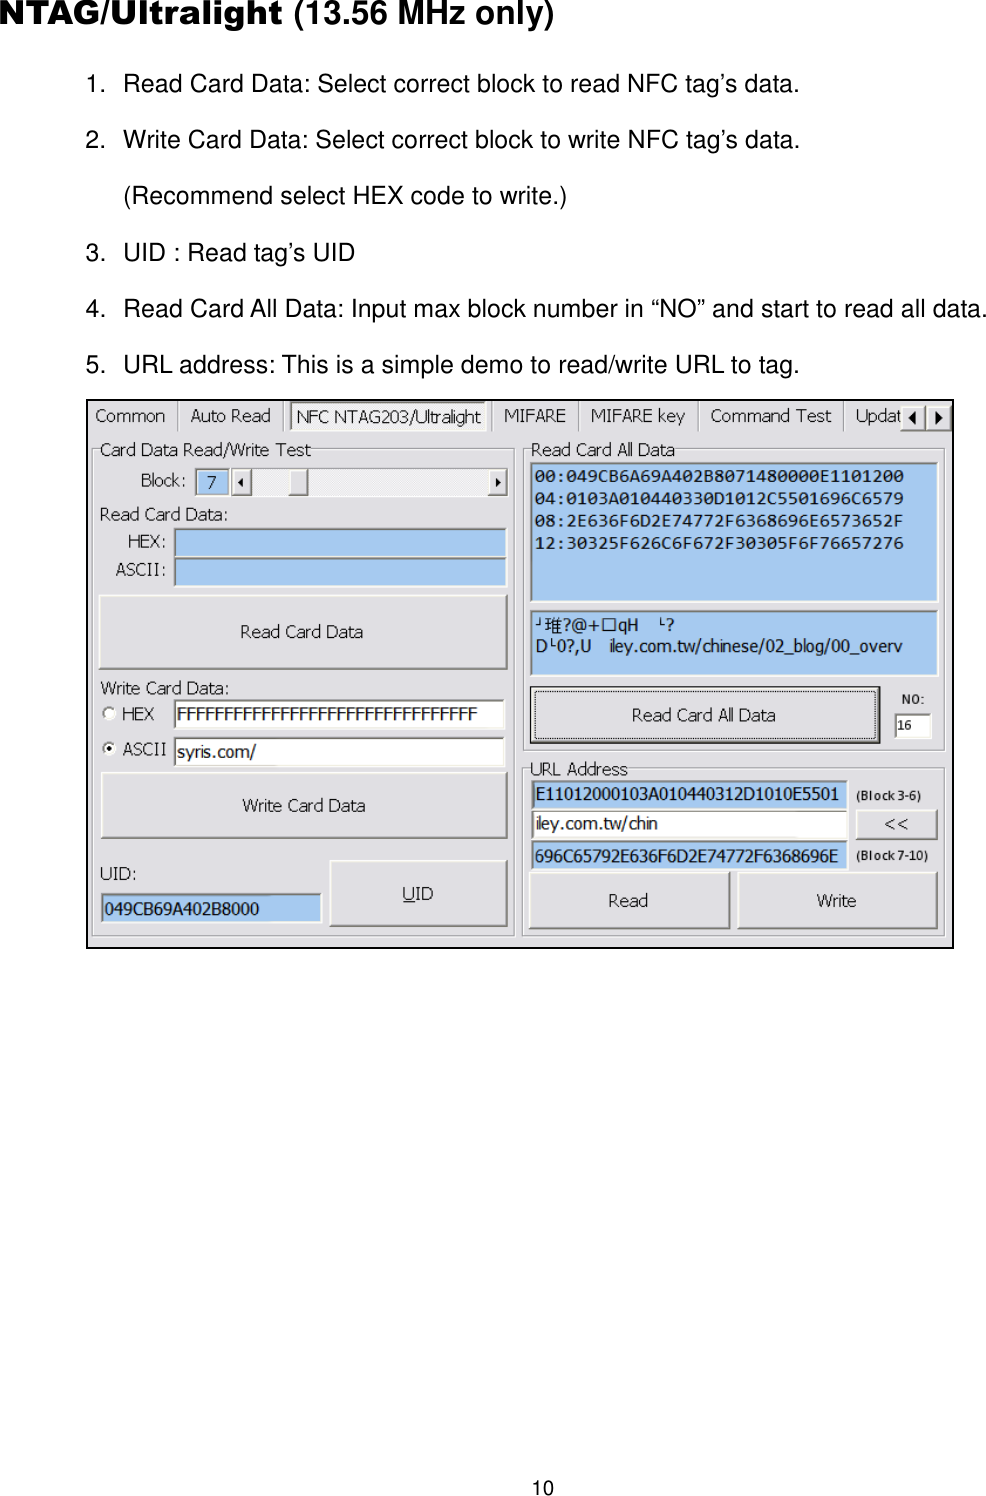 10  NTAG/Ultralight (13.56 MHz only) 1.  Read Card Data: Select correct block to read NFC tag’s data. 2.  Write Card Data: Select correct block to write NFC tag’s data. (Recommend select HEX code to write.) 3.  UID : Read tag’s UID 4.  Read Card All Data: Input max block number in “NO” and start to read all data. 5.  URL address: This is a simple demo to read/write URL to tag.     